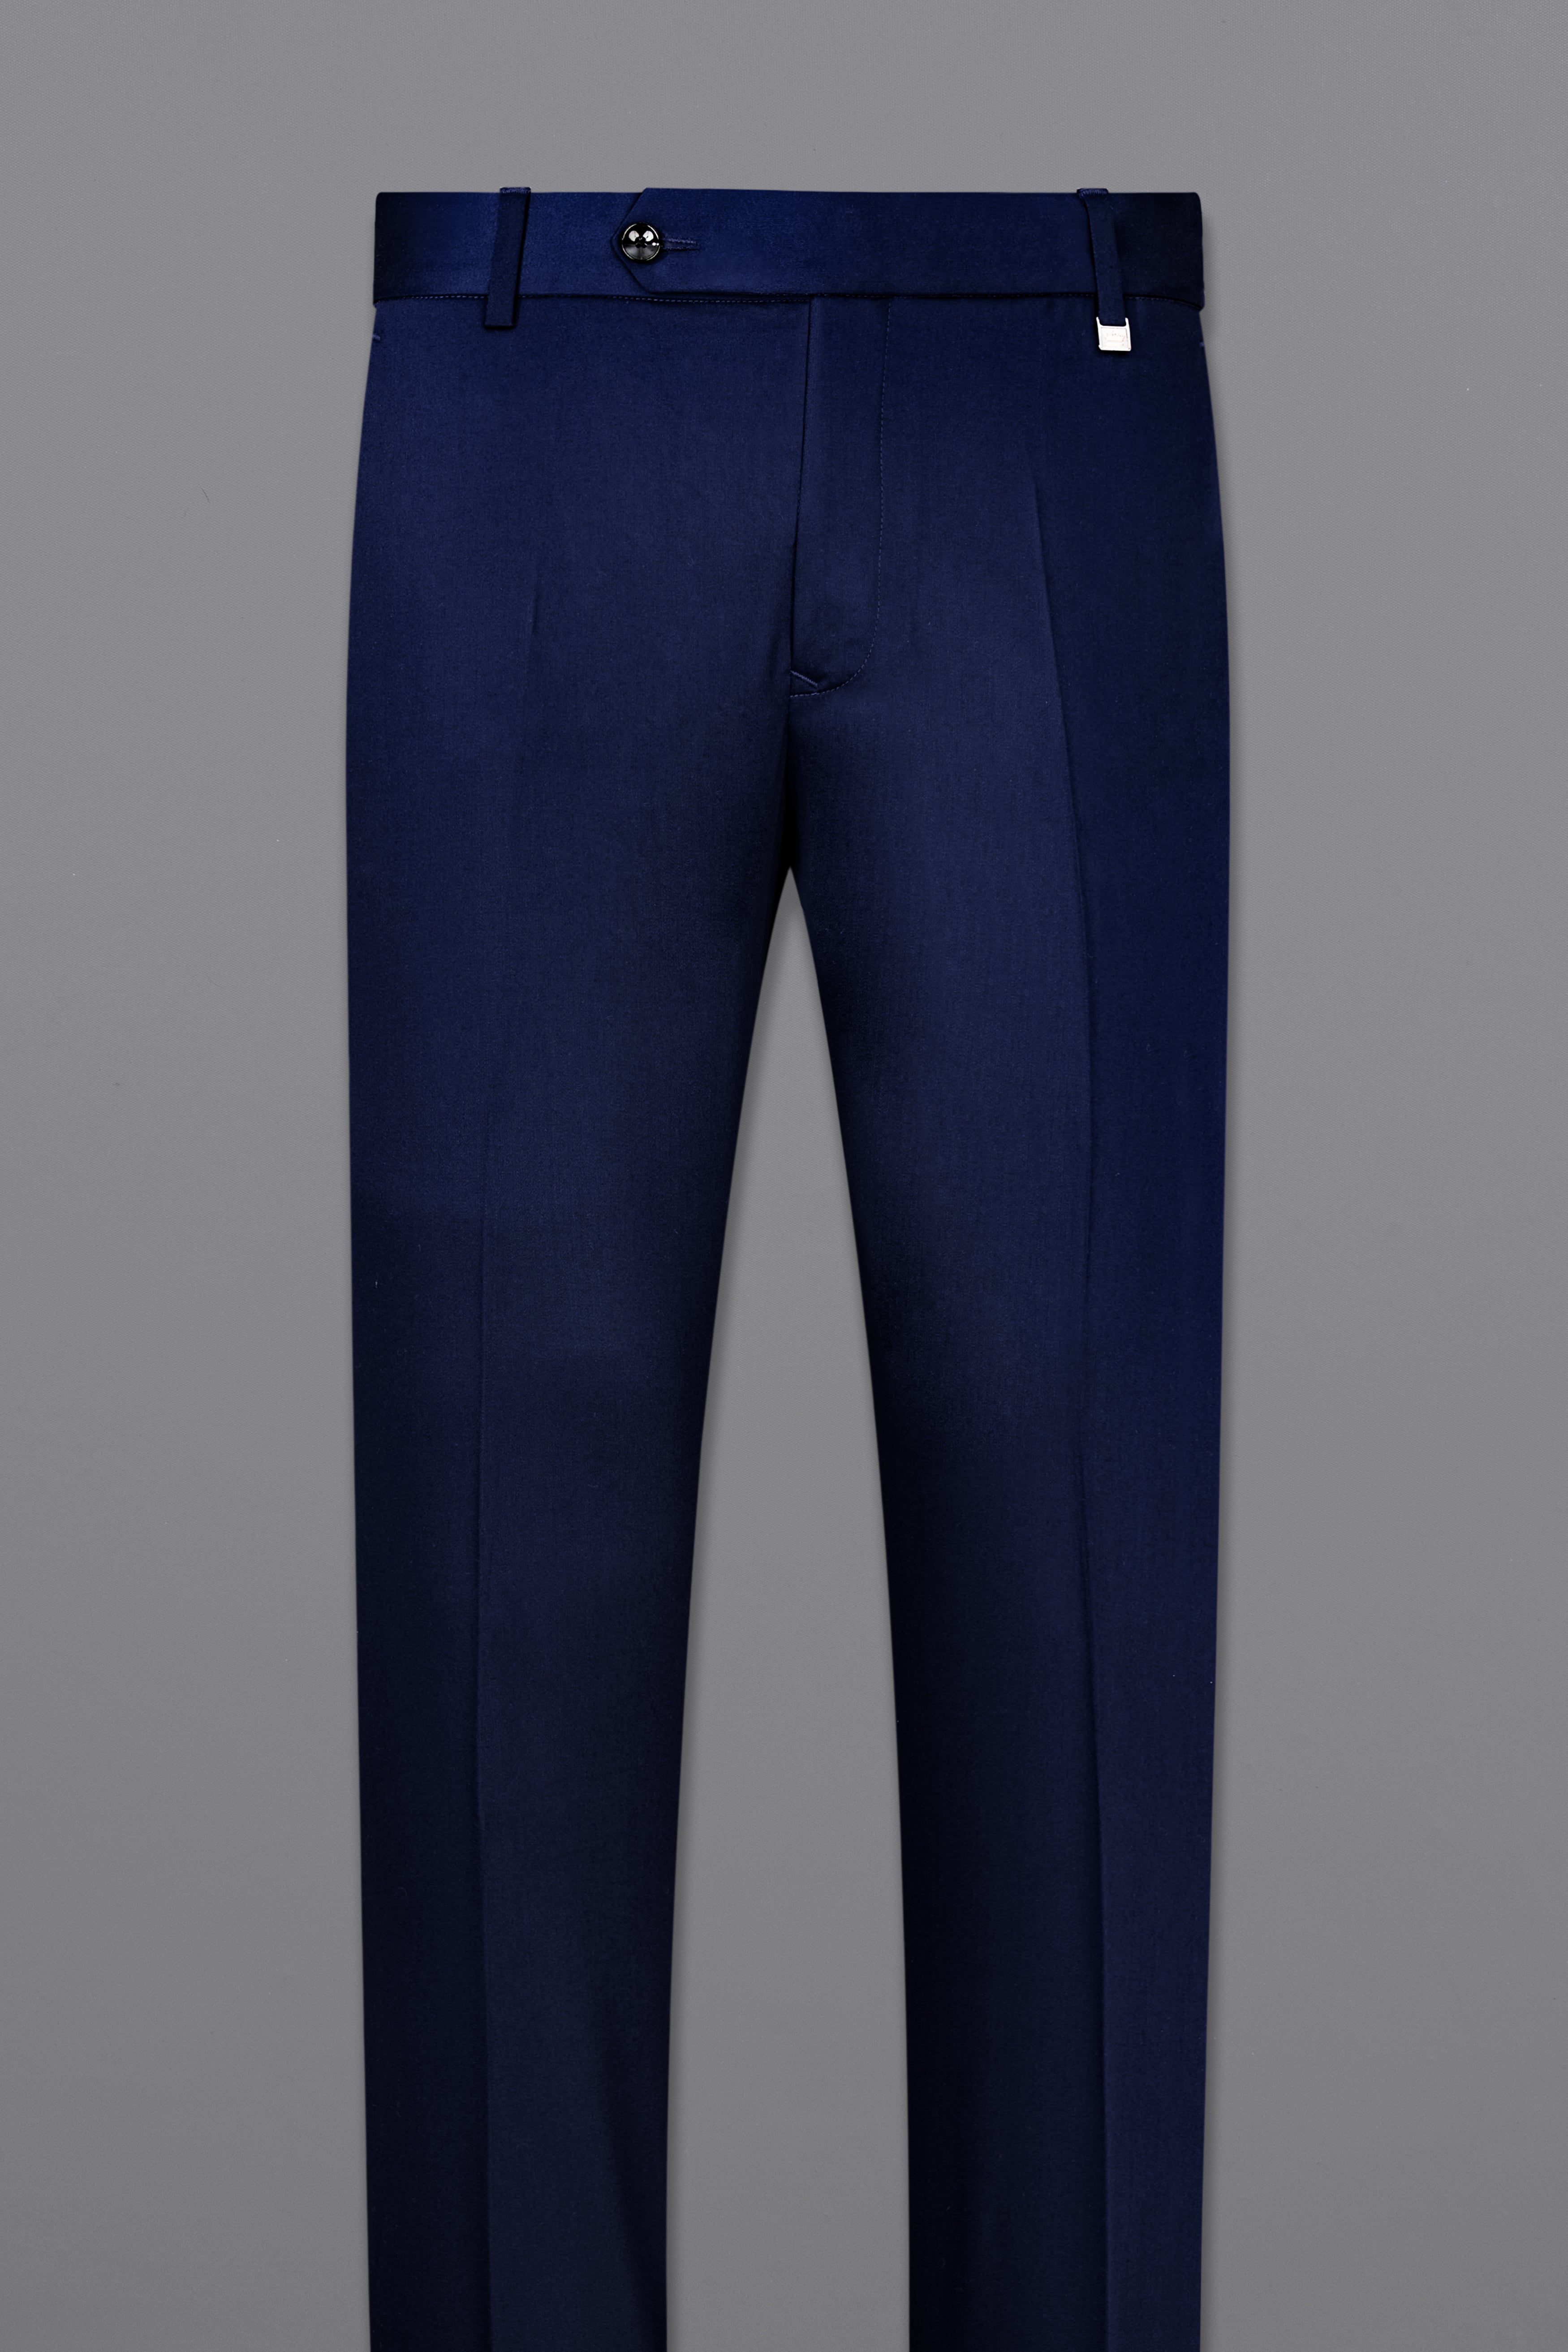 Space Blue Subtle Sheen Double Breasted Suit